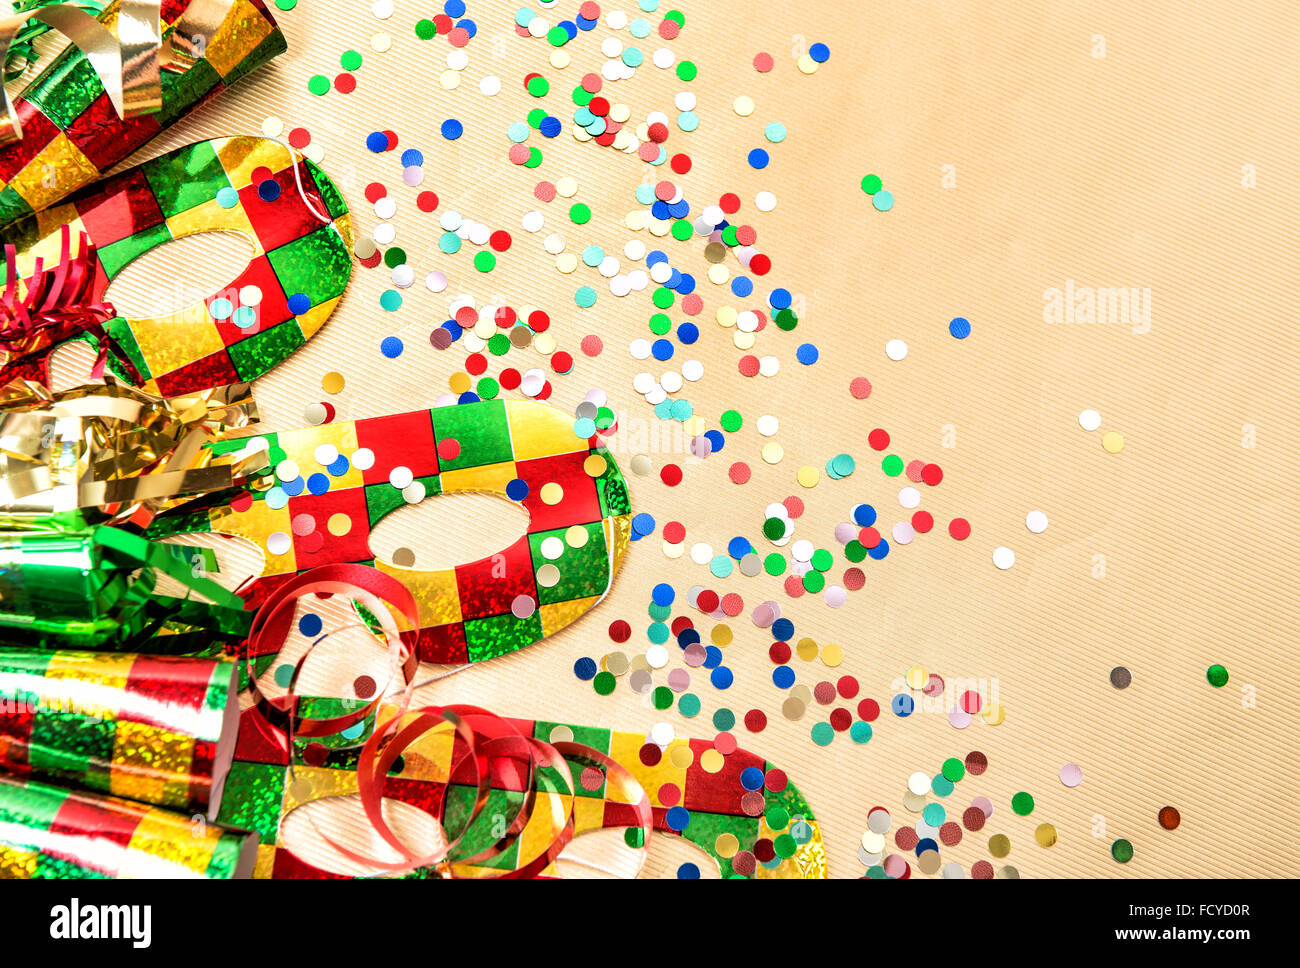 Carnival party mask, confetti and streamer decoration. Colorful holidays background Stock Photo